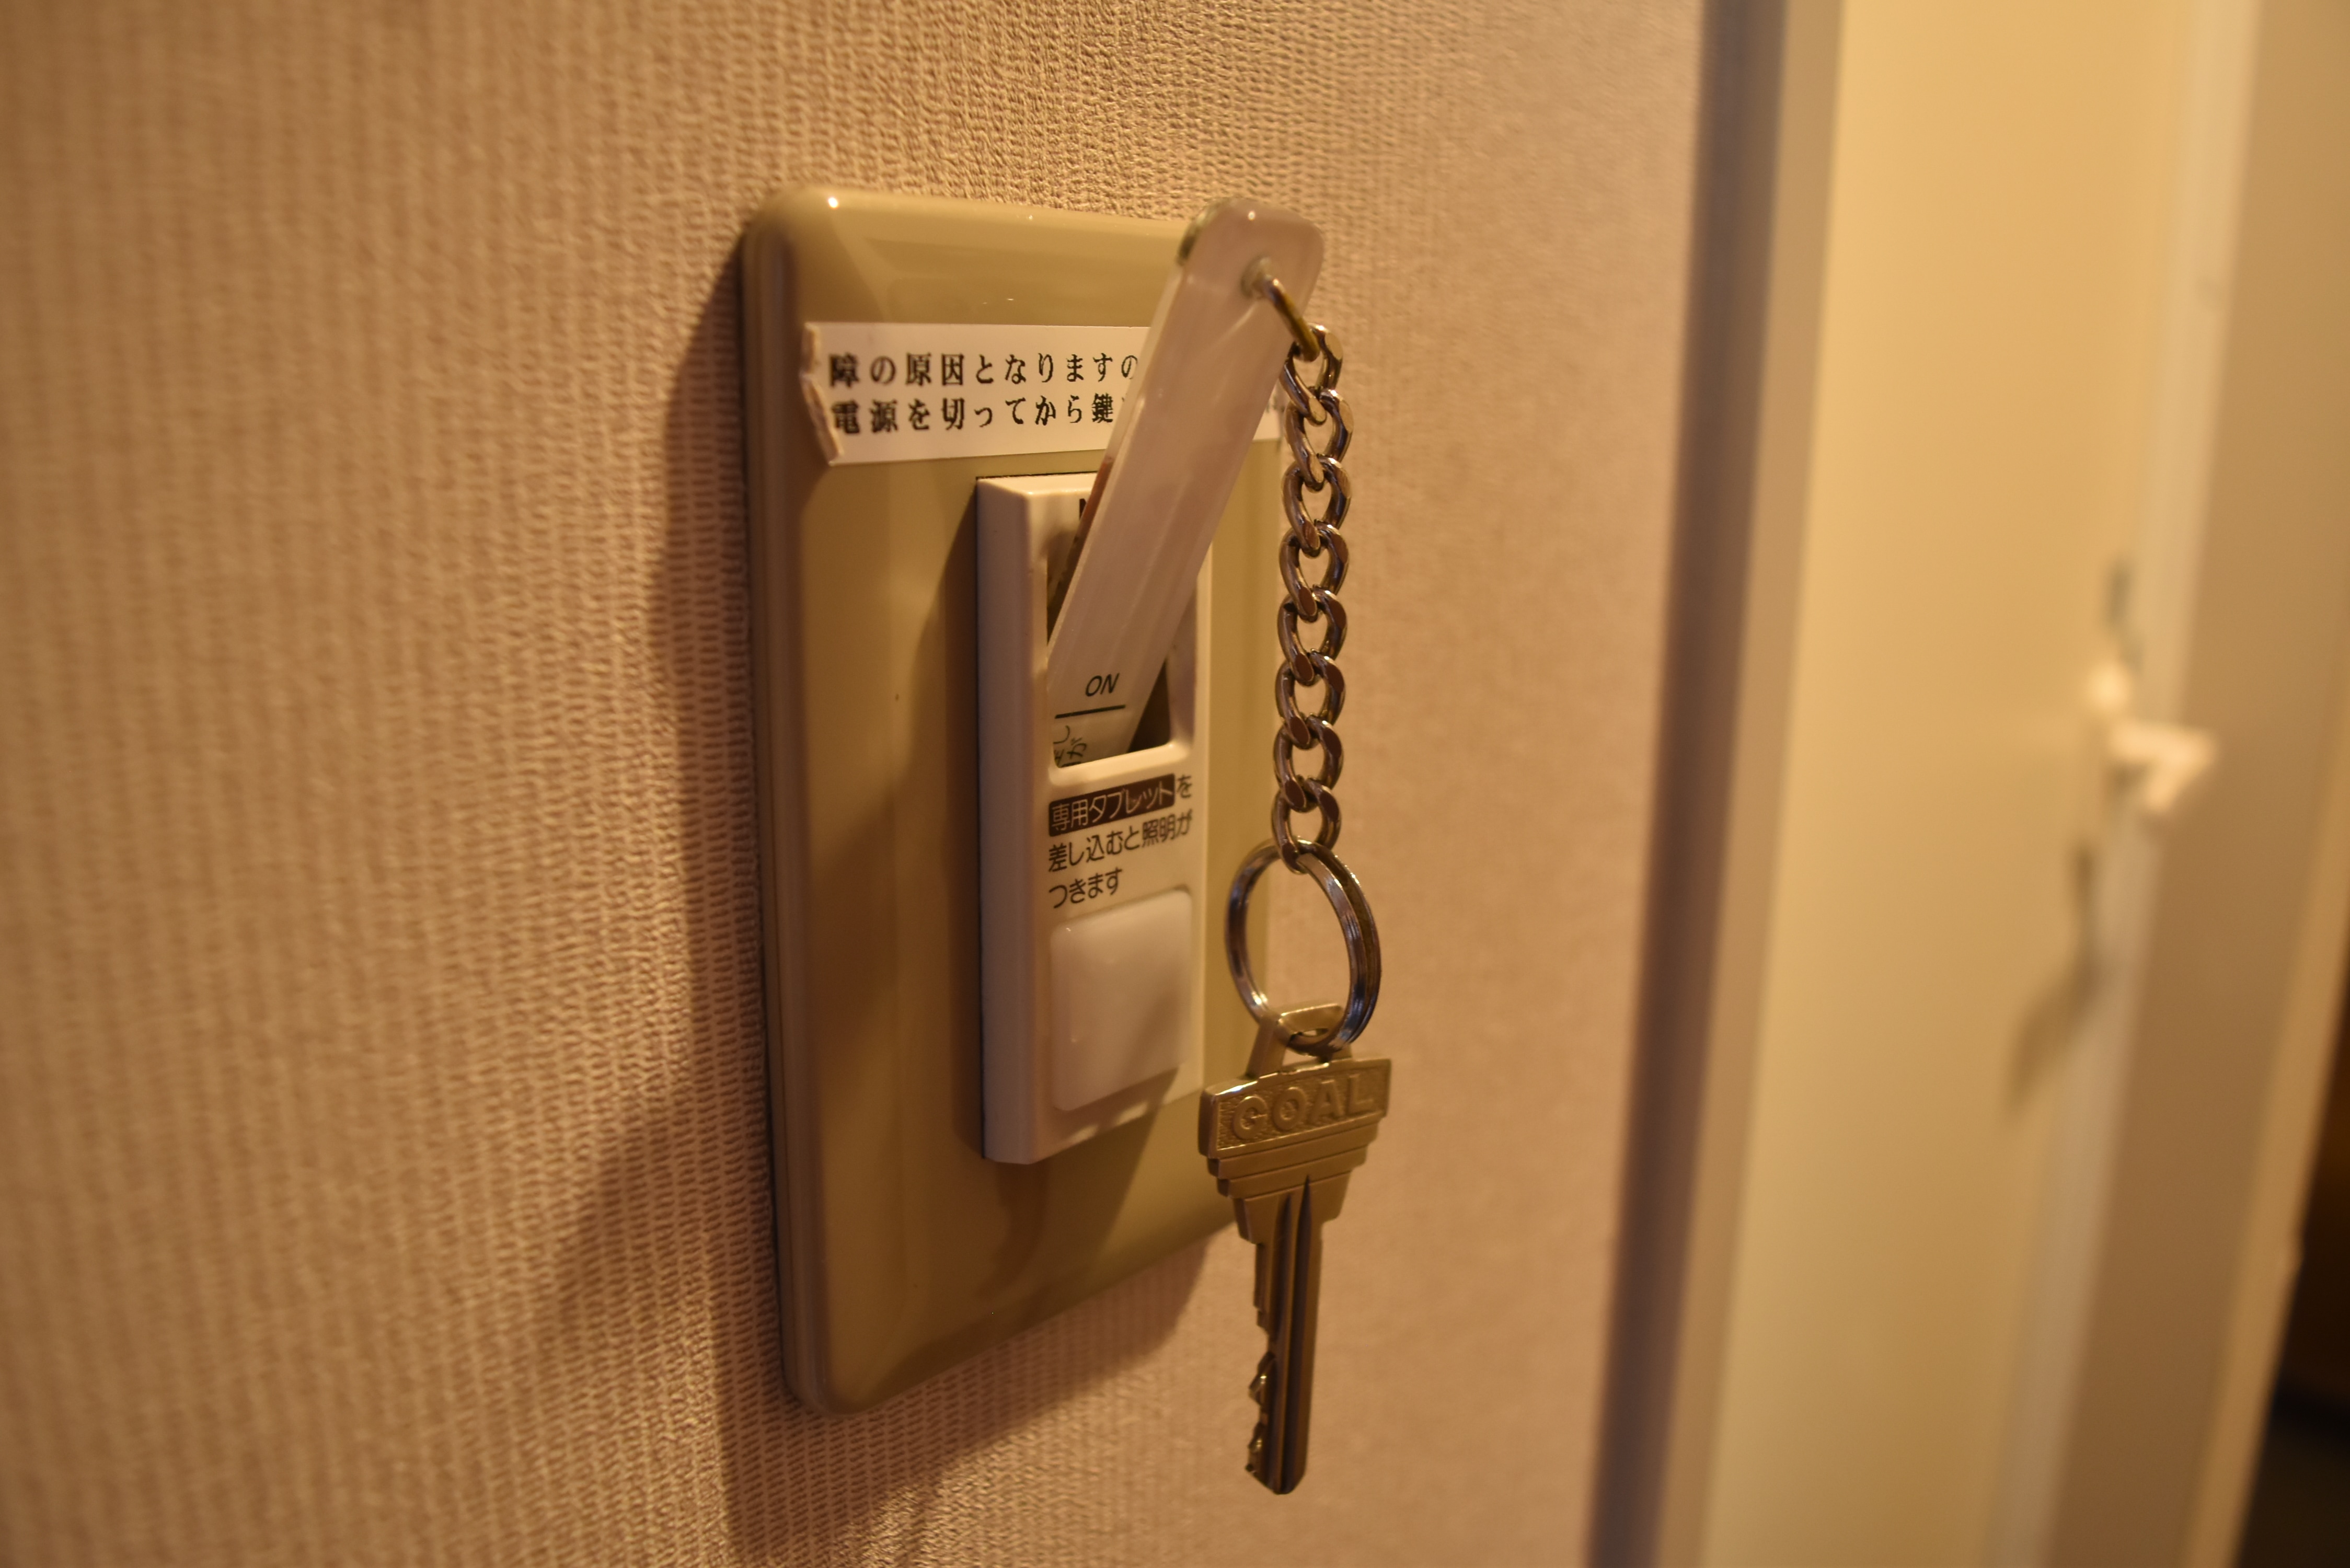 It is a system that turns on the electricity in the room by inserting the room key.